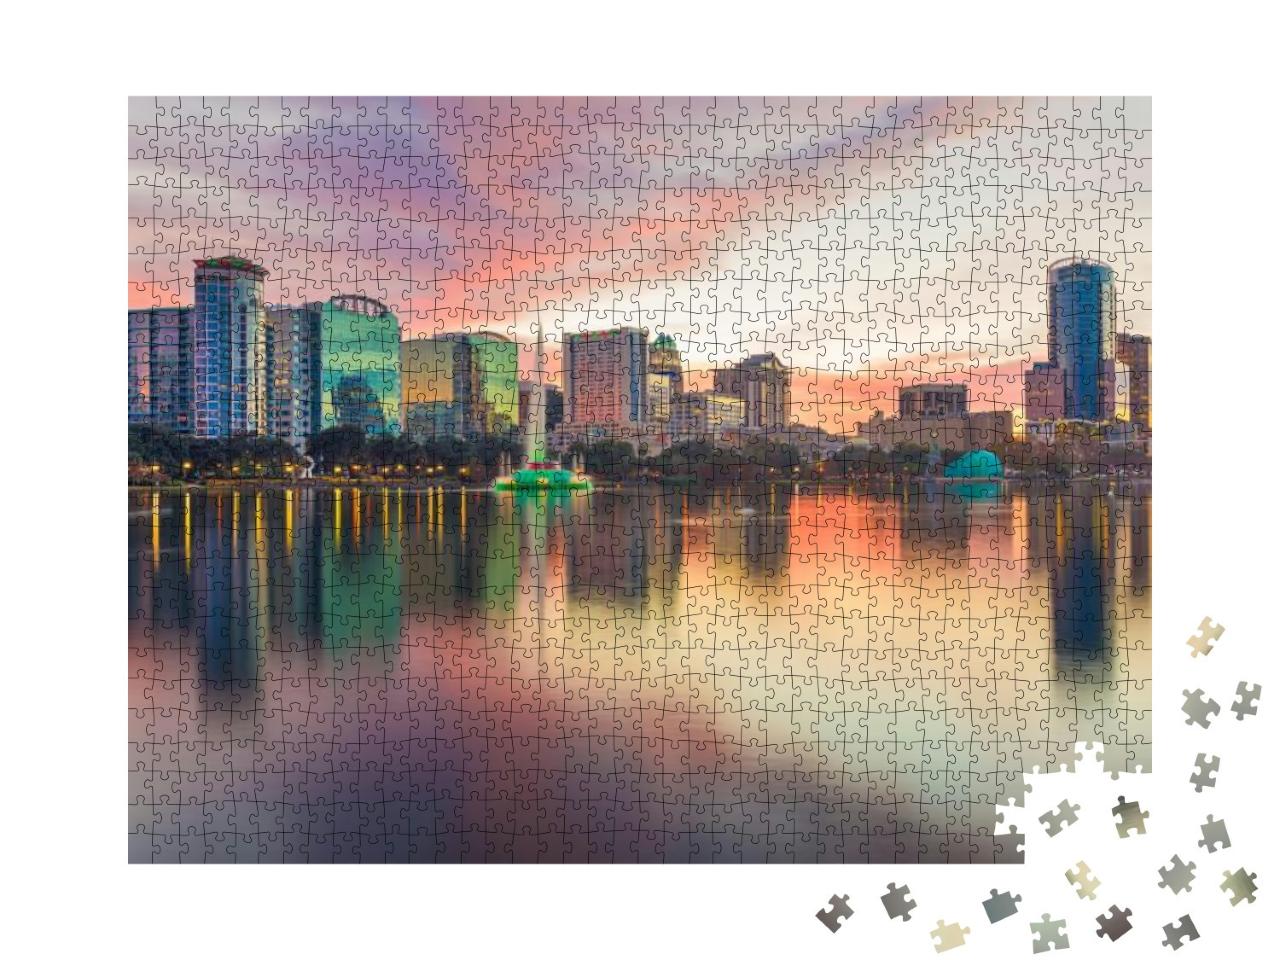 Orlando, Florida, USA Downtown City Skyline from Eola Park... Jigsaw Puzzle with 1000 pieces